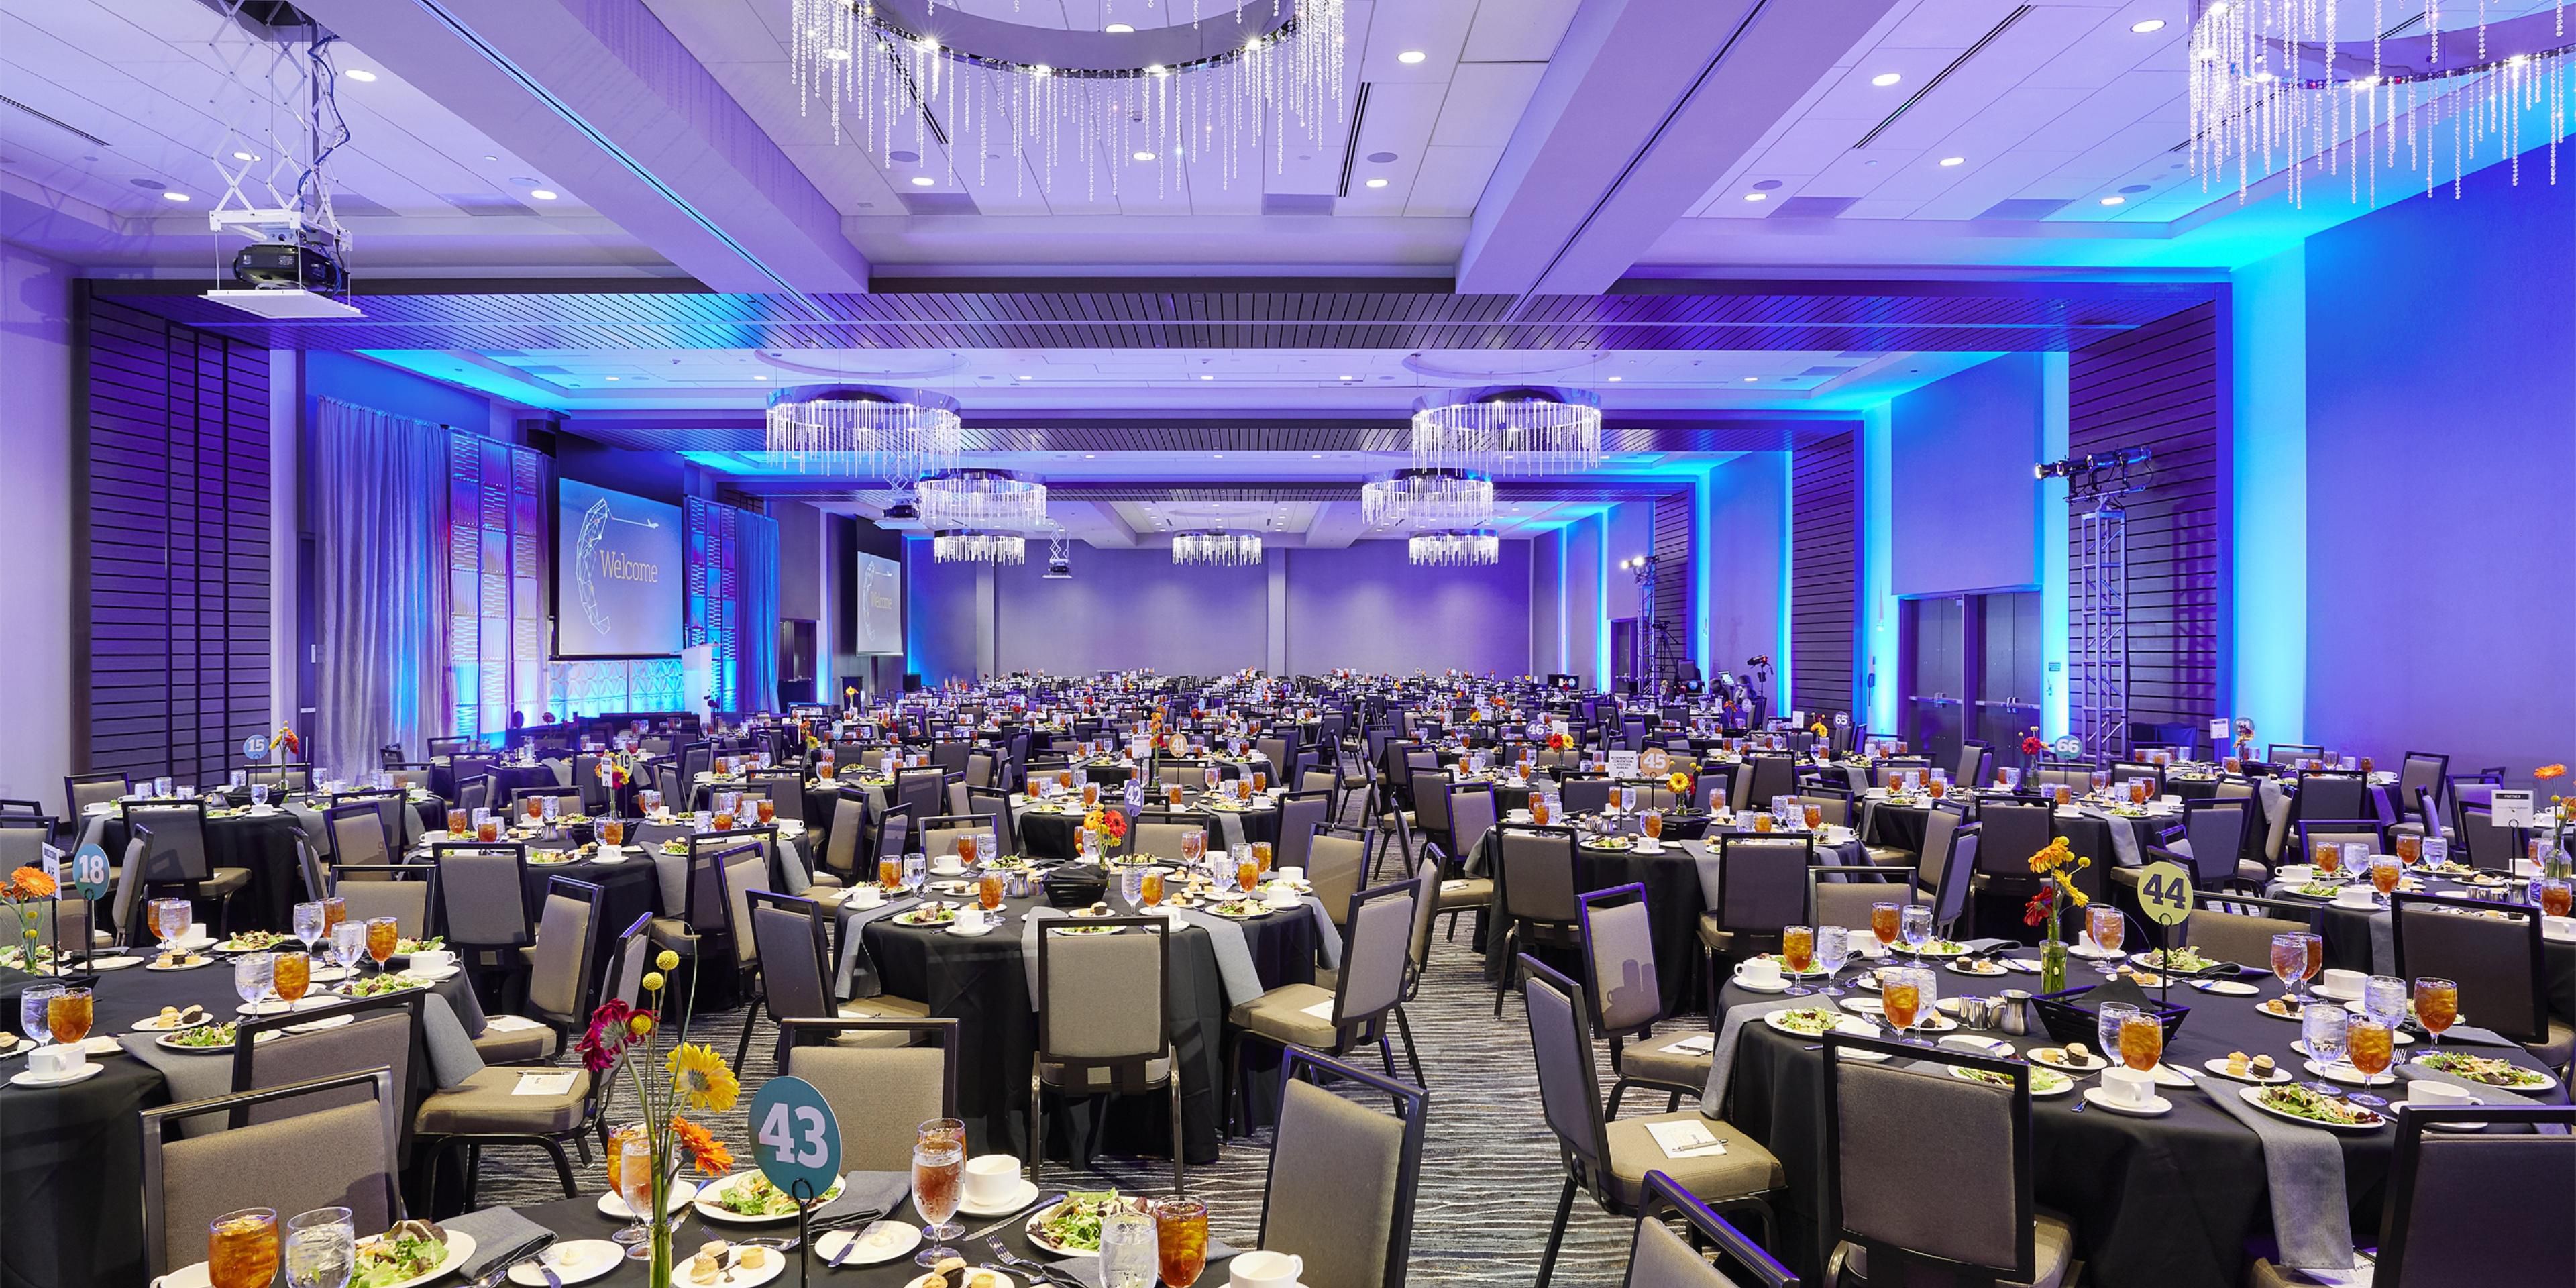 With 19 meeting rooms and over 30,000 sq. ft. of dynamic space, host your next signature event with ease with the help of our in-house meeting and event planners. The elegant ballroom hosts up to 1550, while for smaller events, the penthouse-level Altitude bar offers striking views of the Twin Cities.